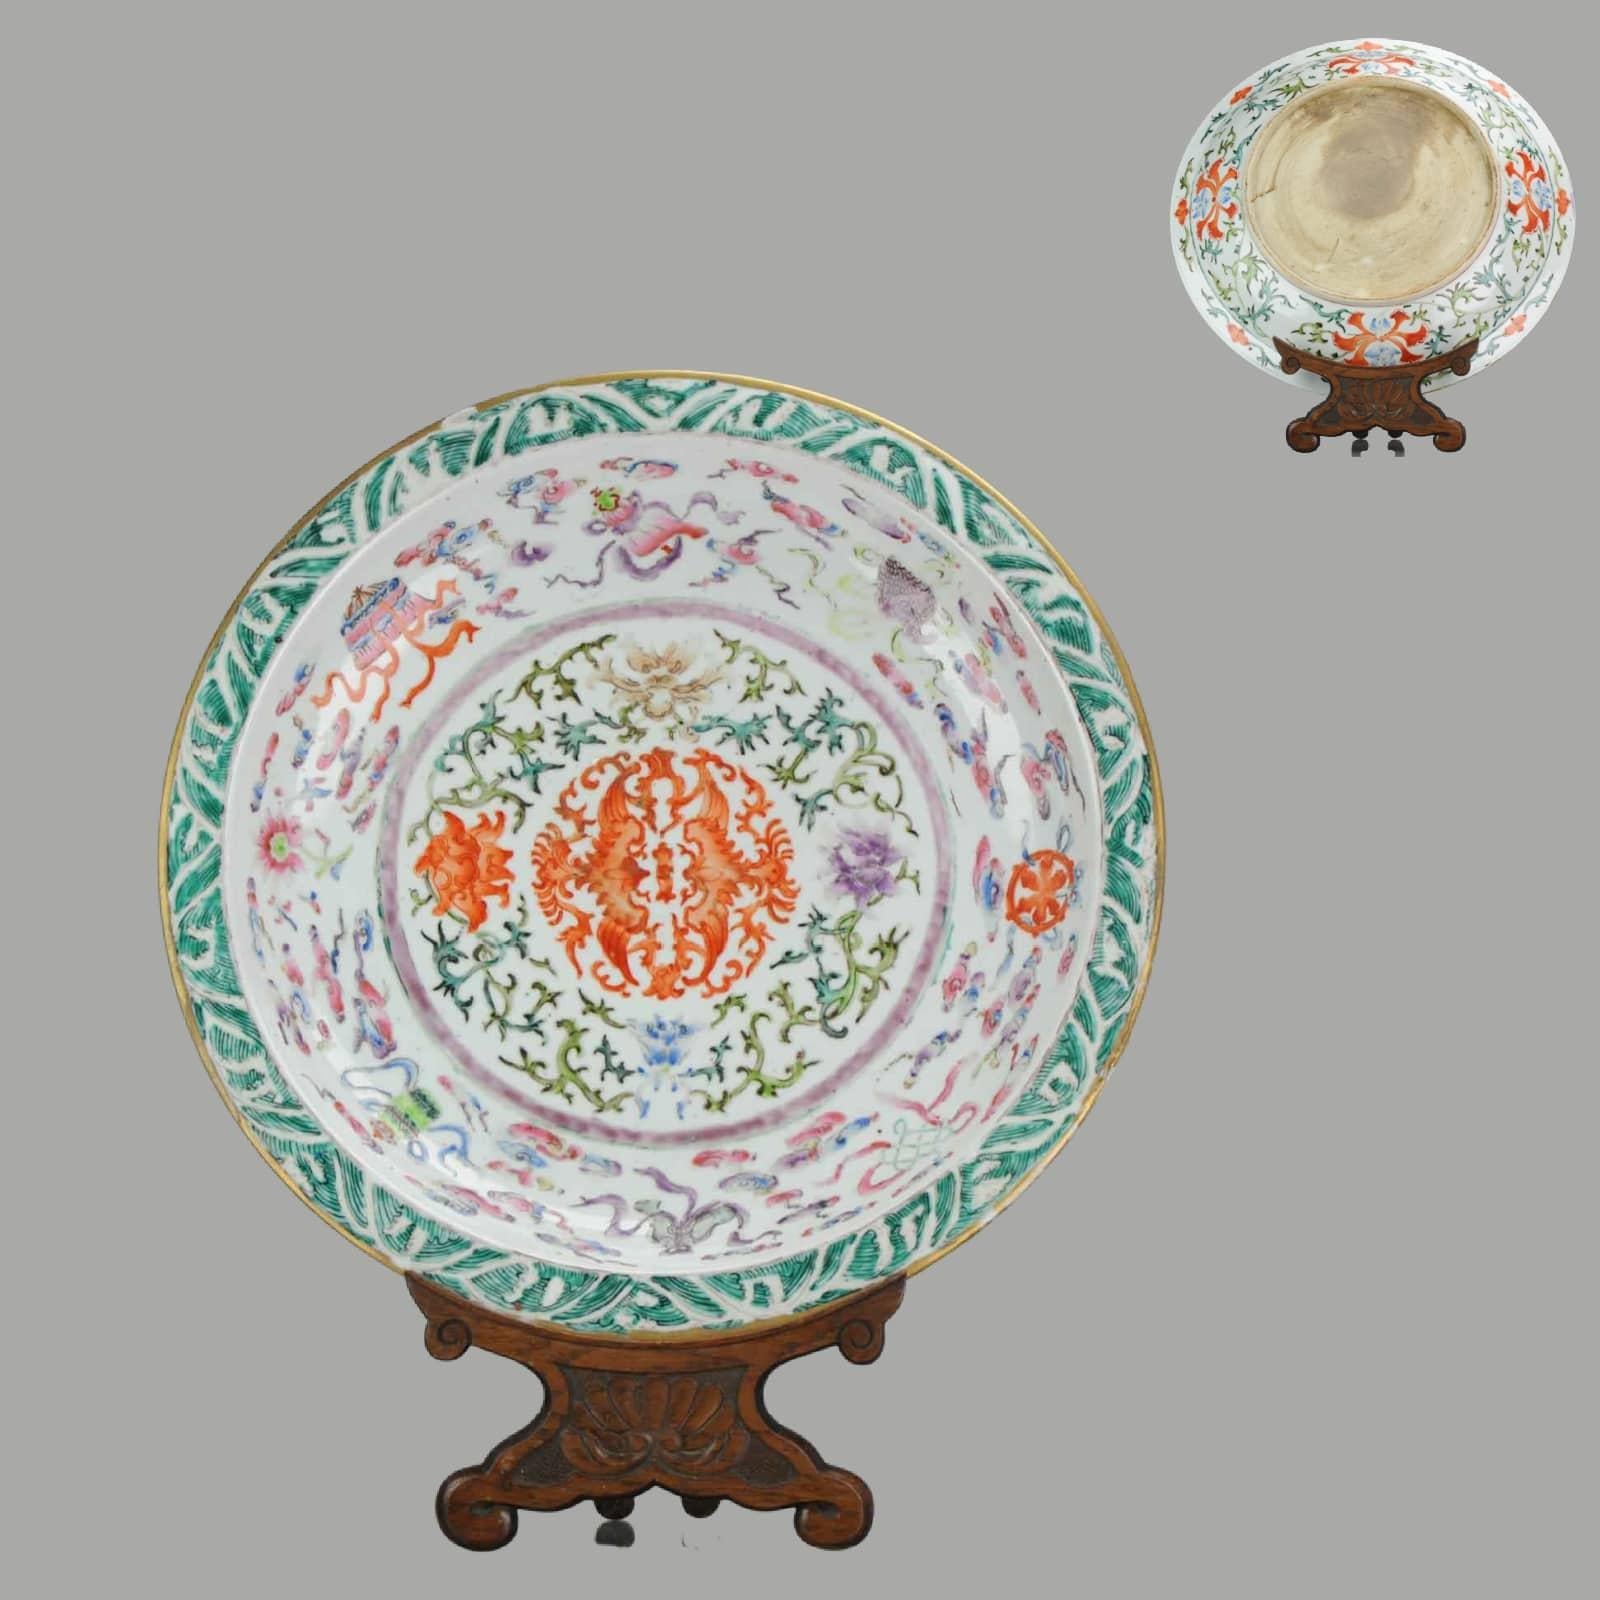 Huge Chinese Plate Porcelain 'Phoenix and Buddhist Emblems' Charger, 19 Century In Good Condition For Sale In Amsterdam, Noord Holland